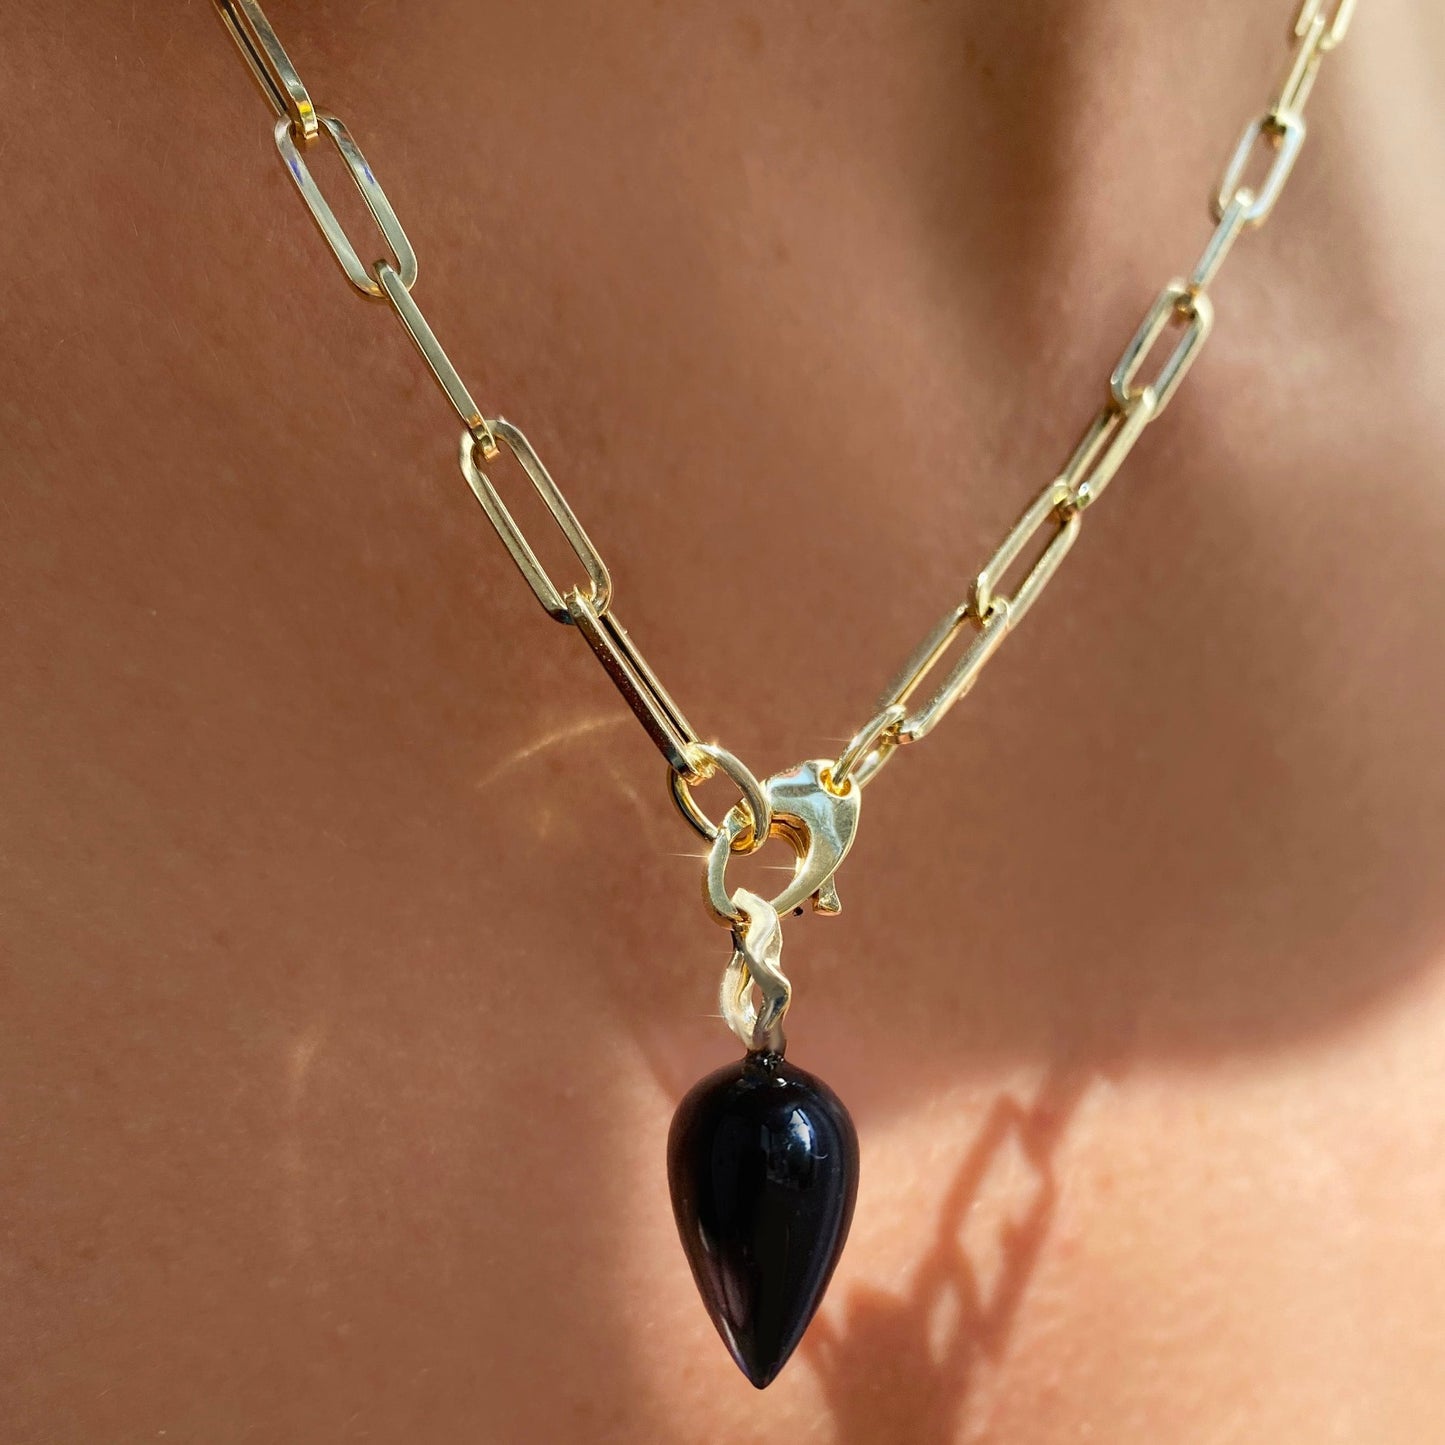 Black agate acorn drop charm. Styled on a neck hanging from the lobster clasp of a chunky paperclip chain necklace